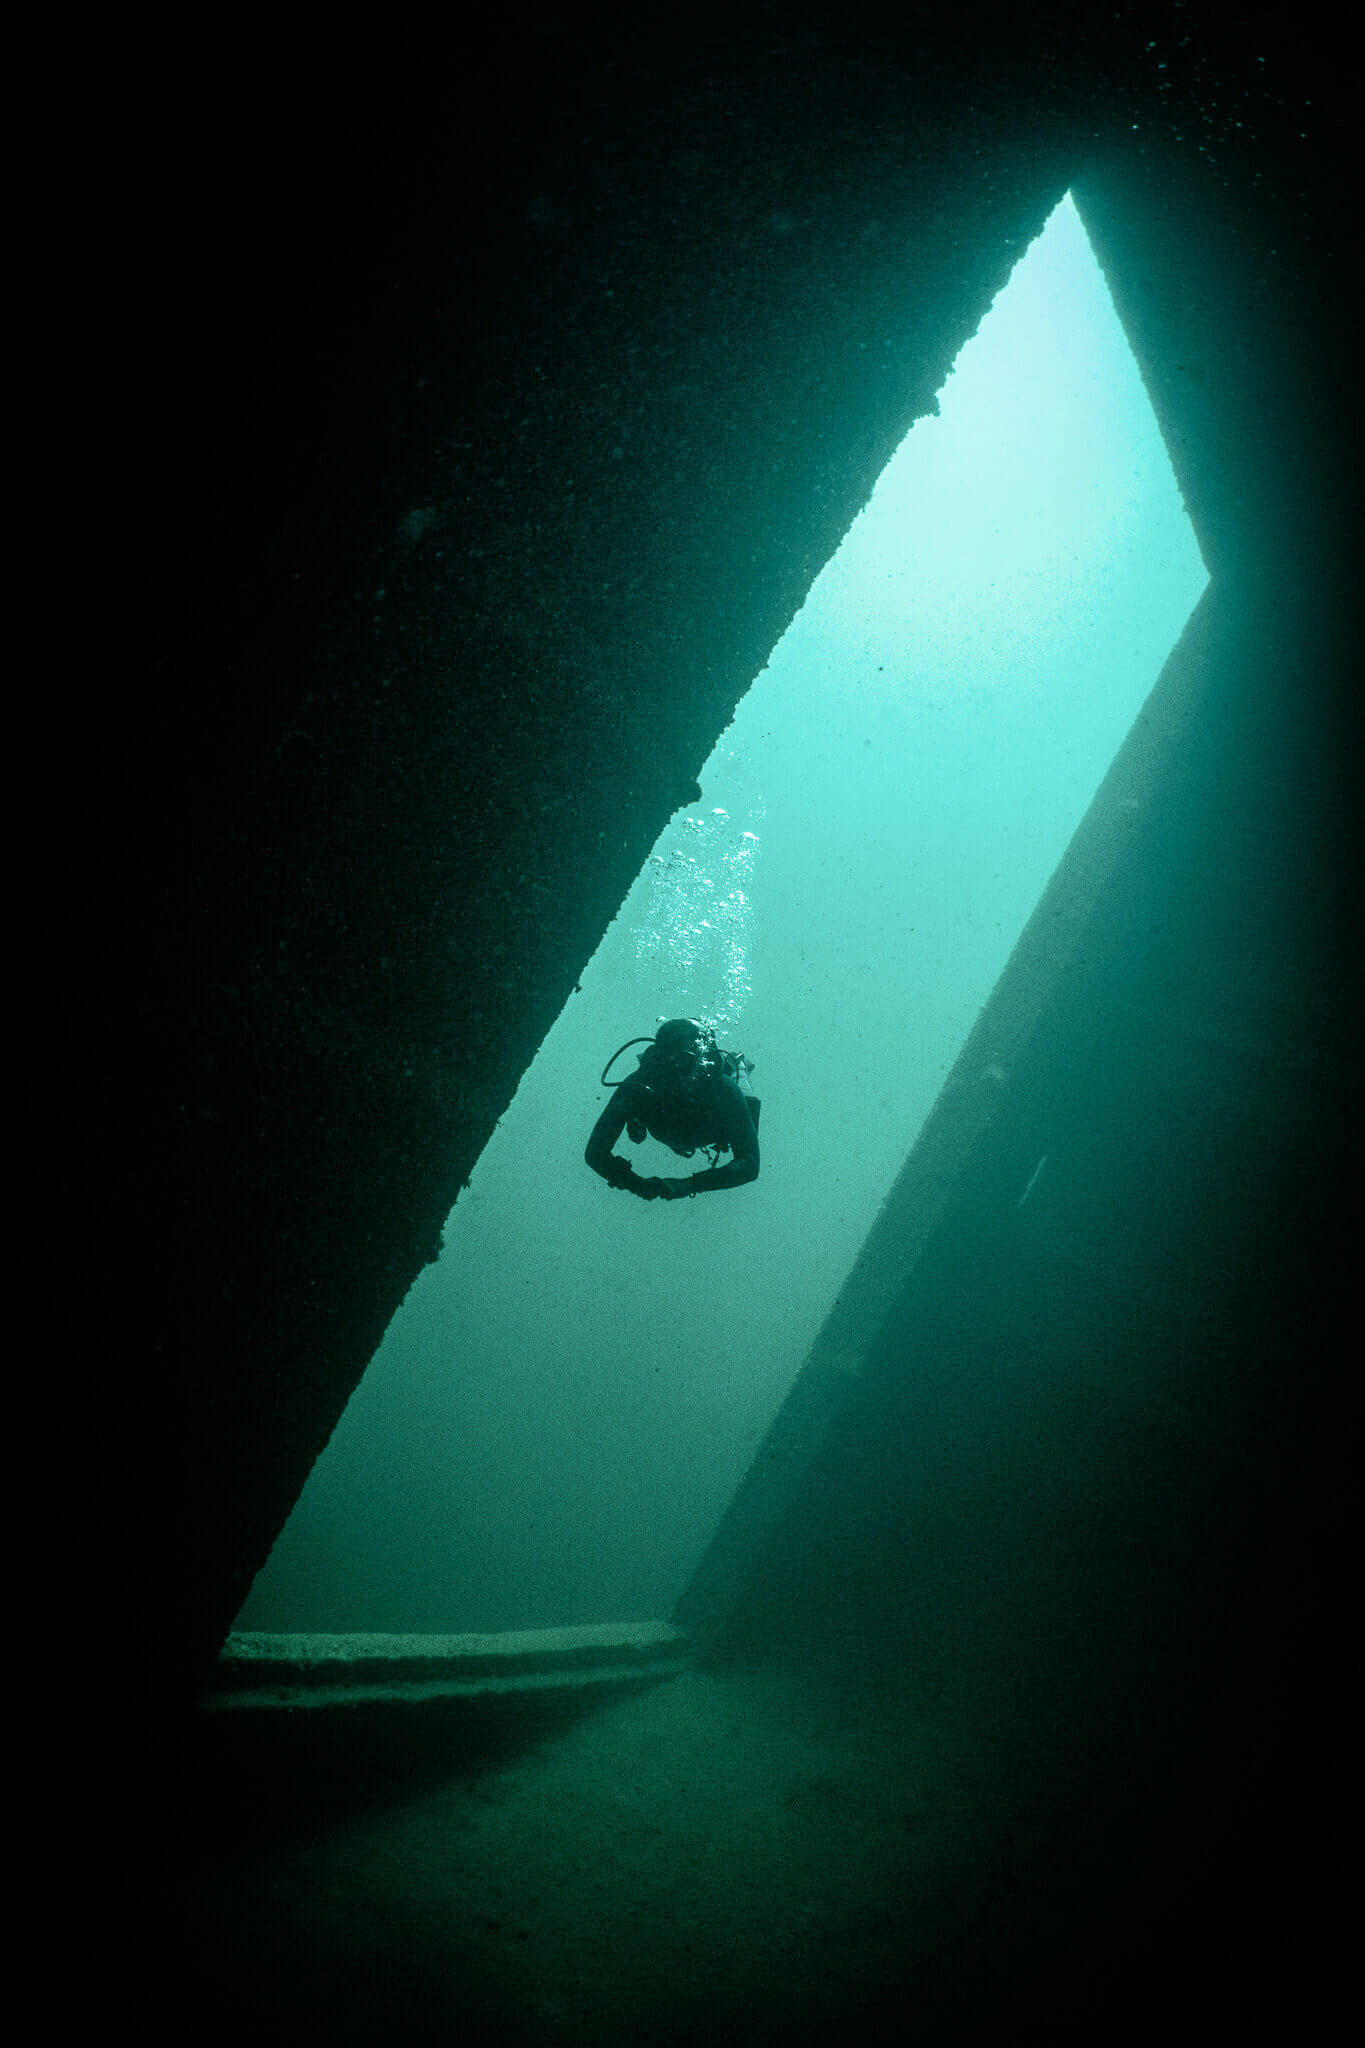 Underwater photo of a scuba diver seen through a cargo hold on the Keystorm shipwreck